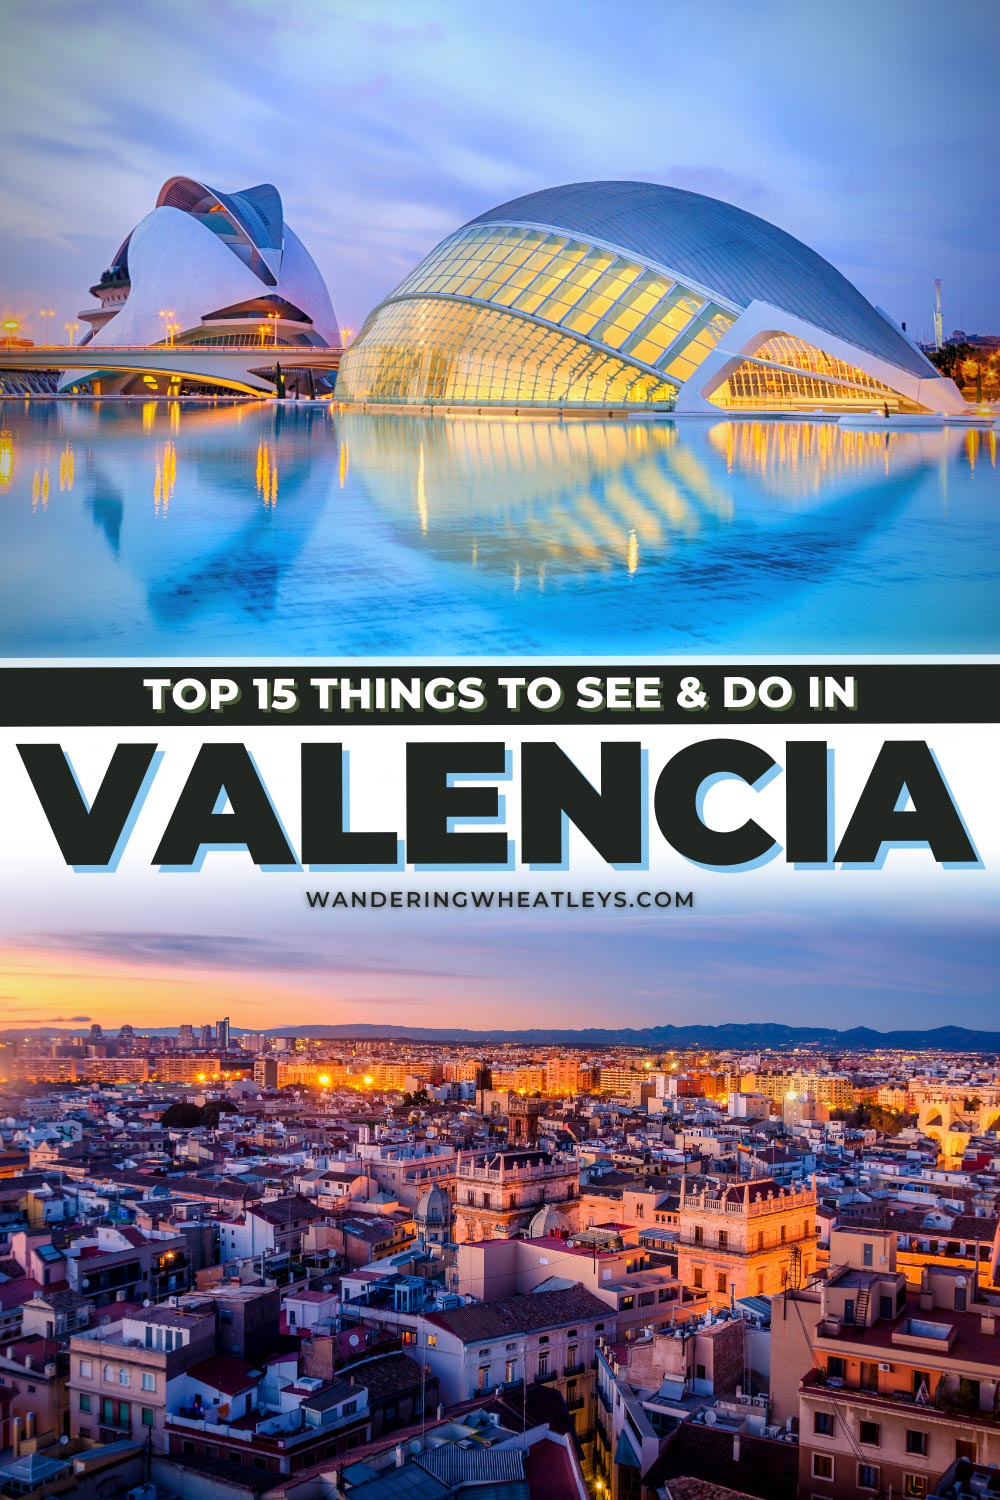 The Best Things to do in Valencia, Spain